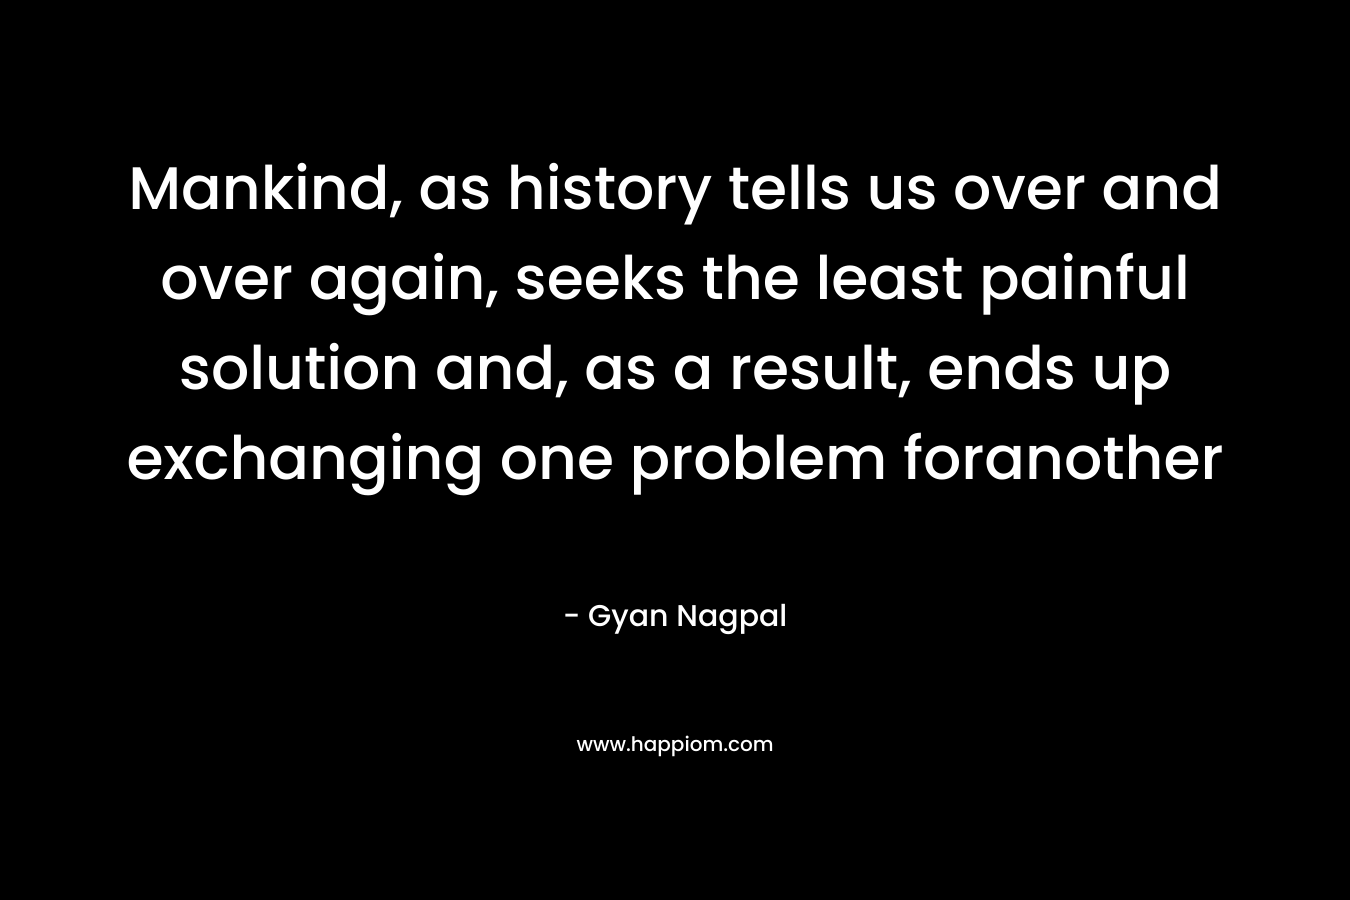 Mankind, as history tells us over and over again, seeks the least painful solution and, as a result, ends up exchanging one problem foranother – Gyan Nagpal